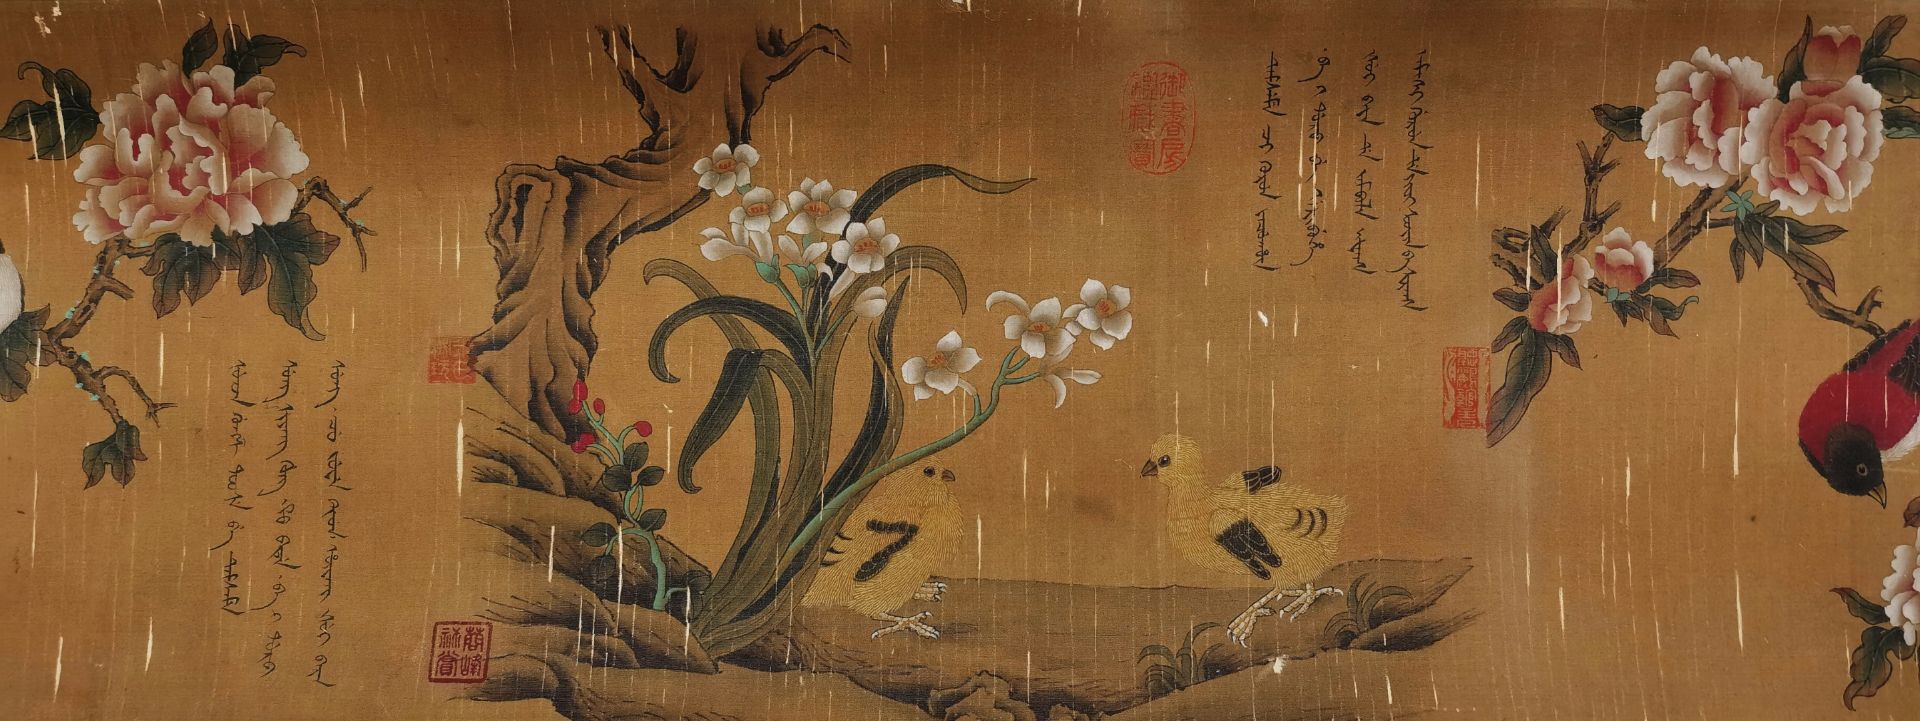 A Chinese Hand Scroll Painting By Jiang Tingxi - Image 3 of 13